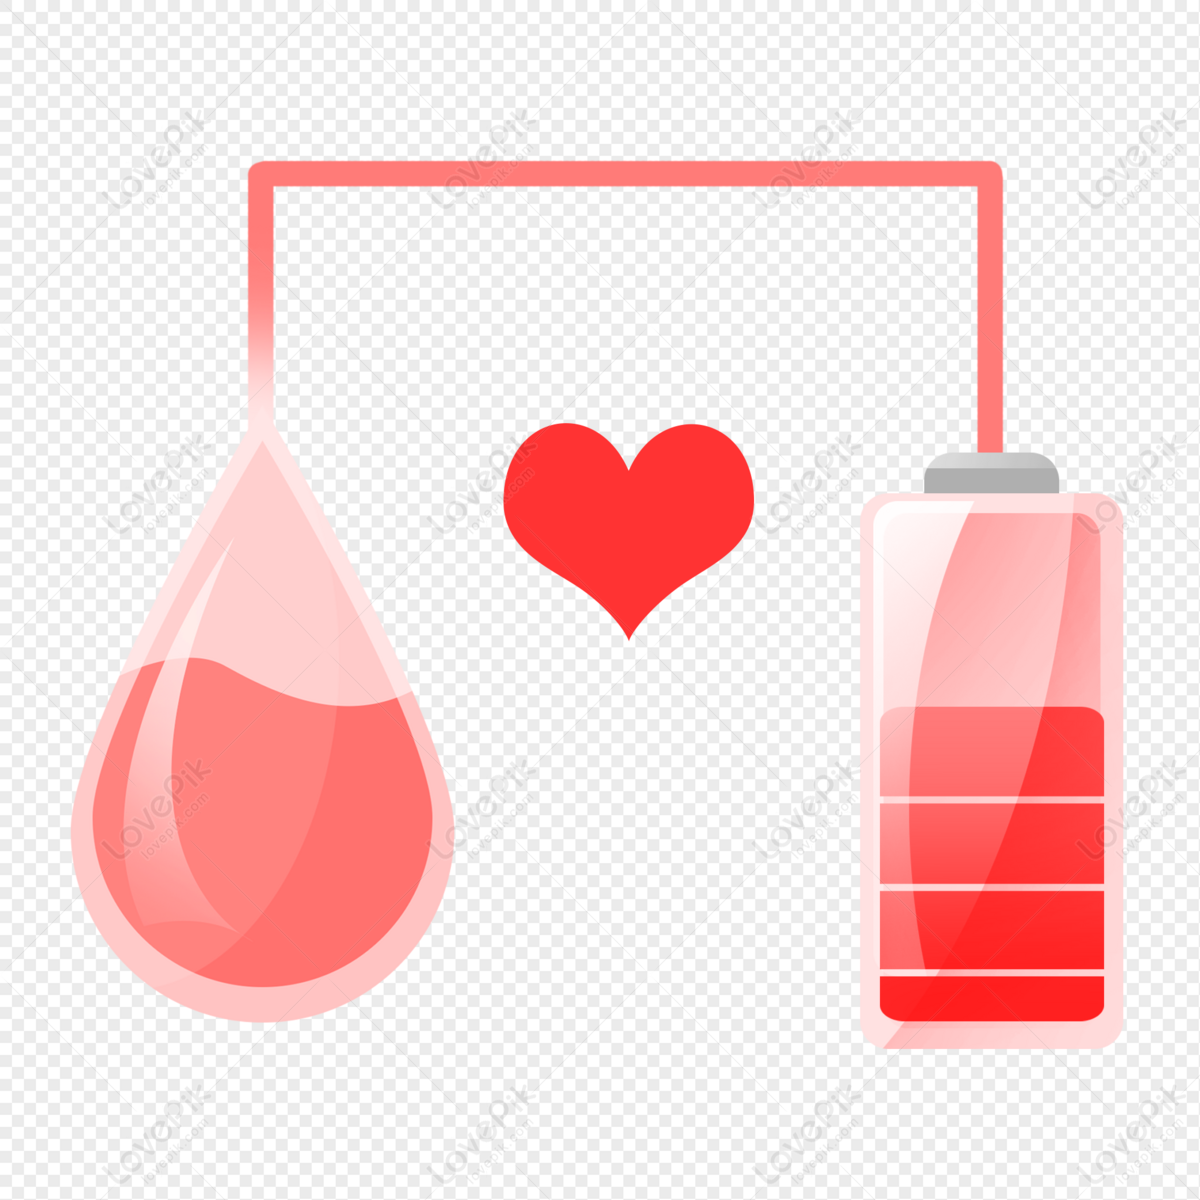 Blood Donation PNG Transparent Background And Clipart Image For Free  Download - Lovepik | 401323610